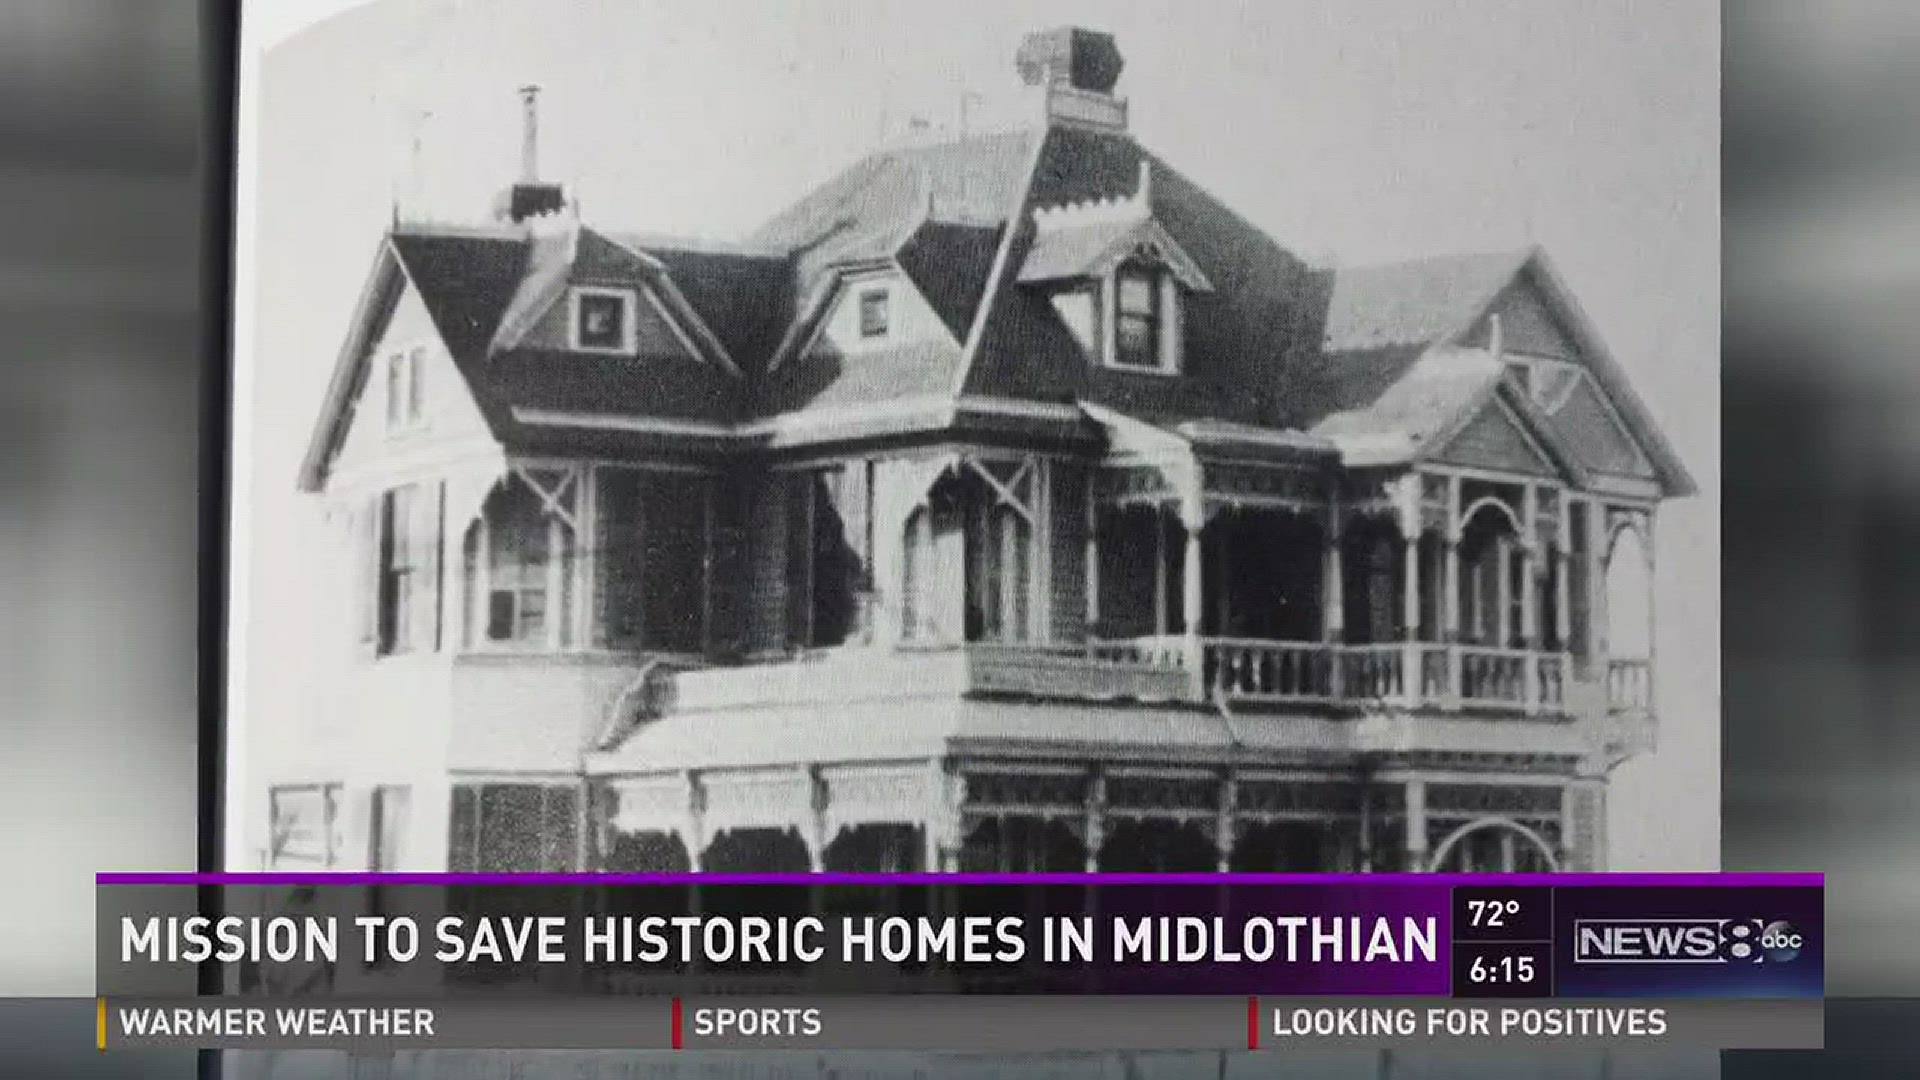 Mission To Save Historic Homes in Midlothian